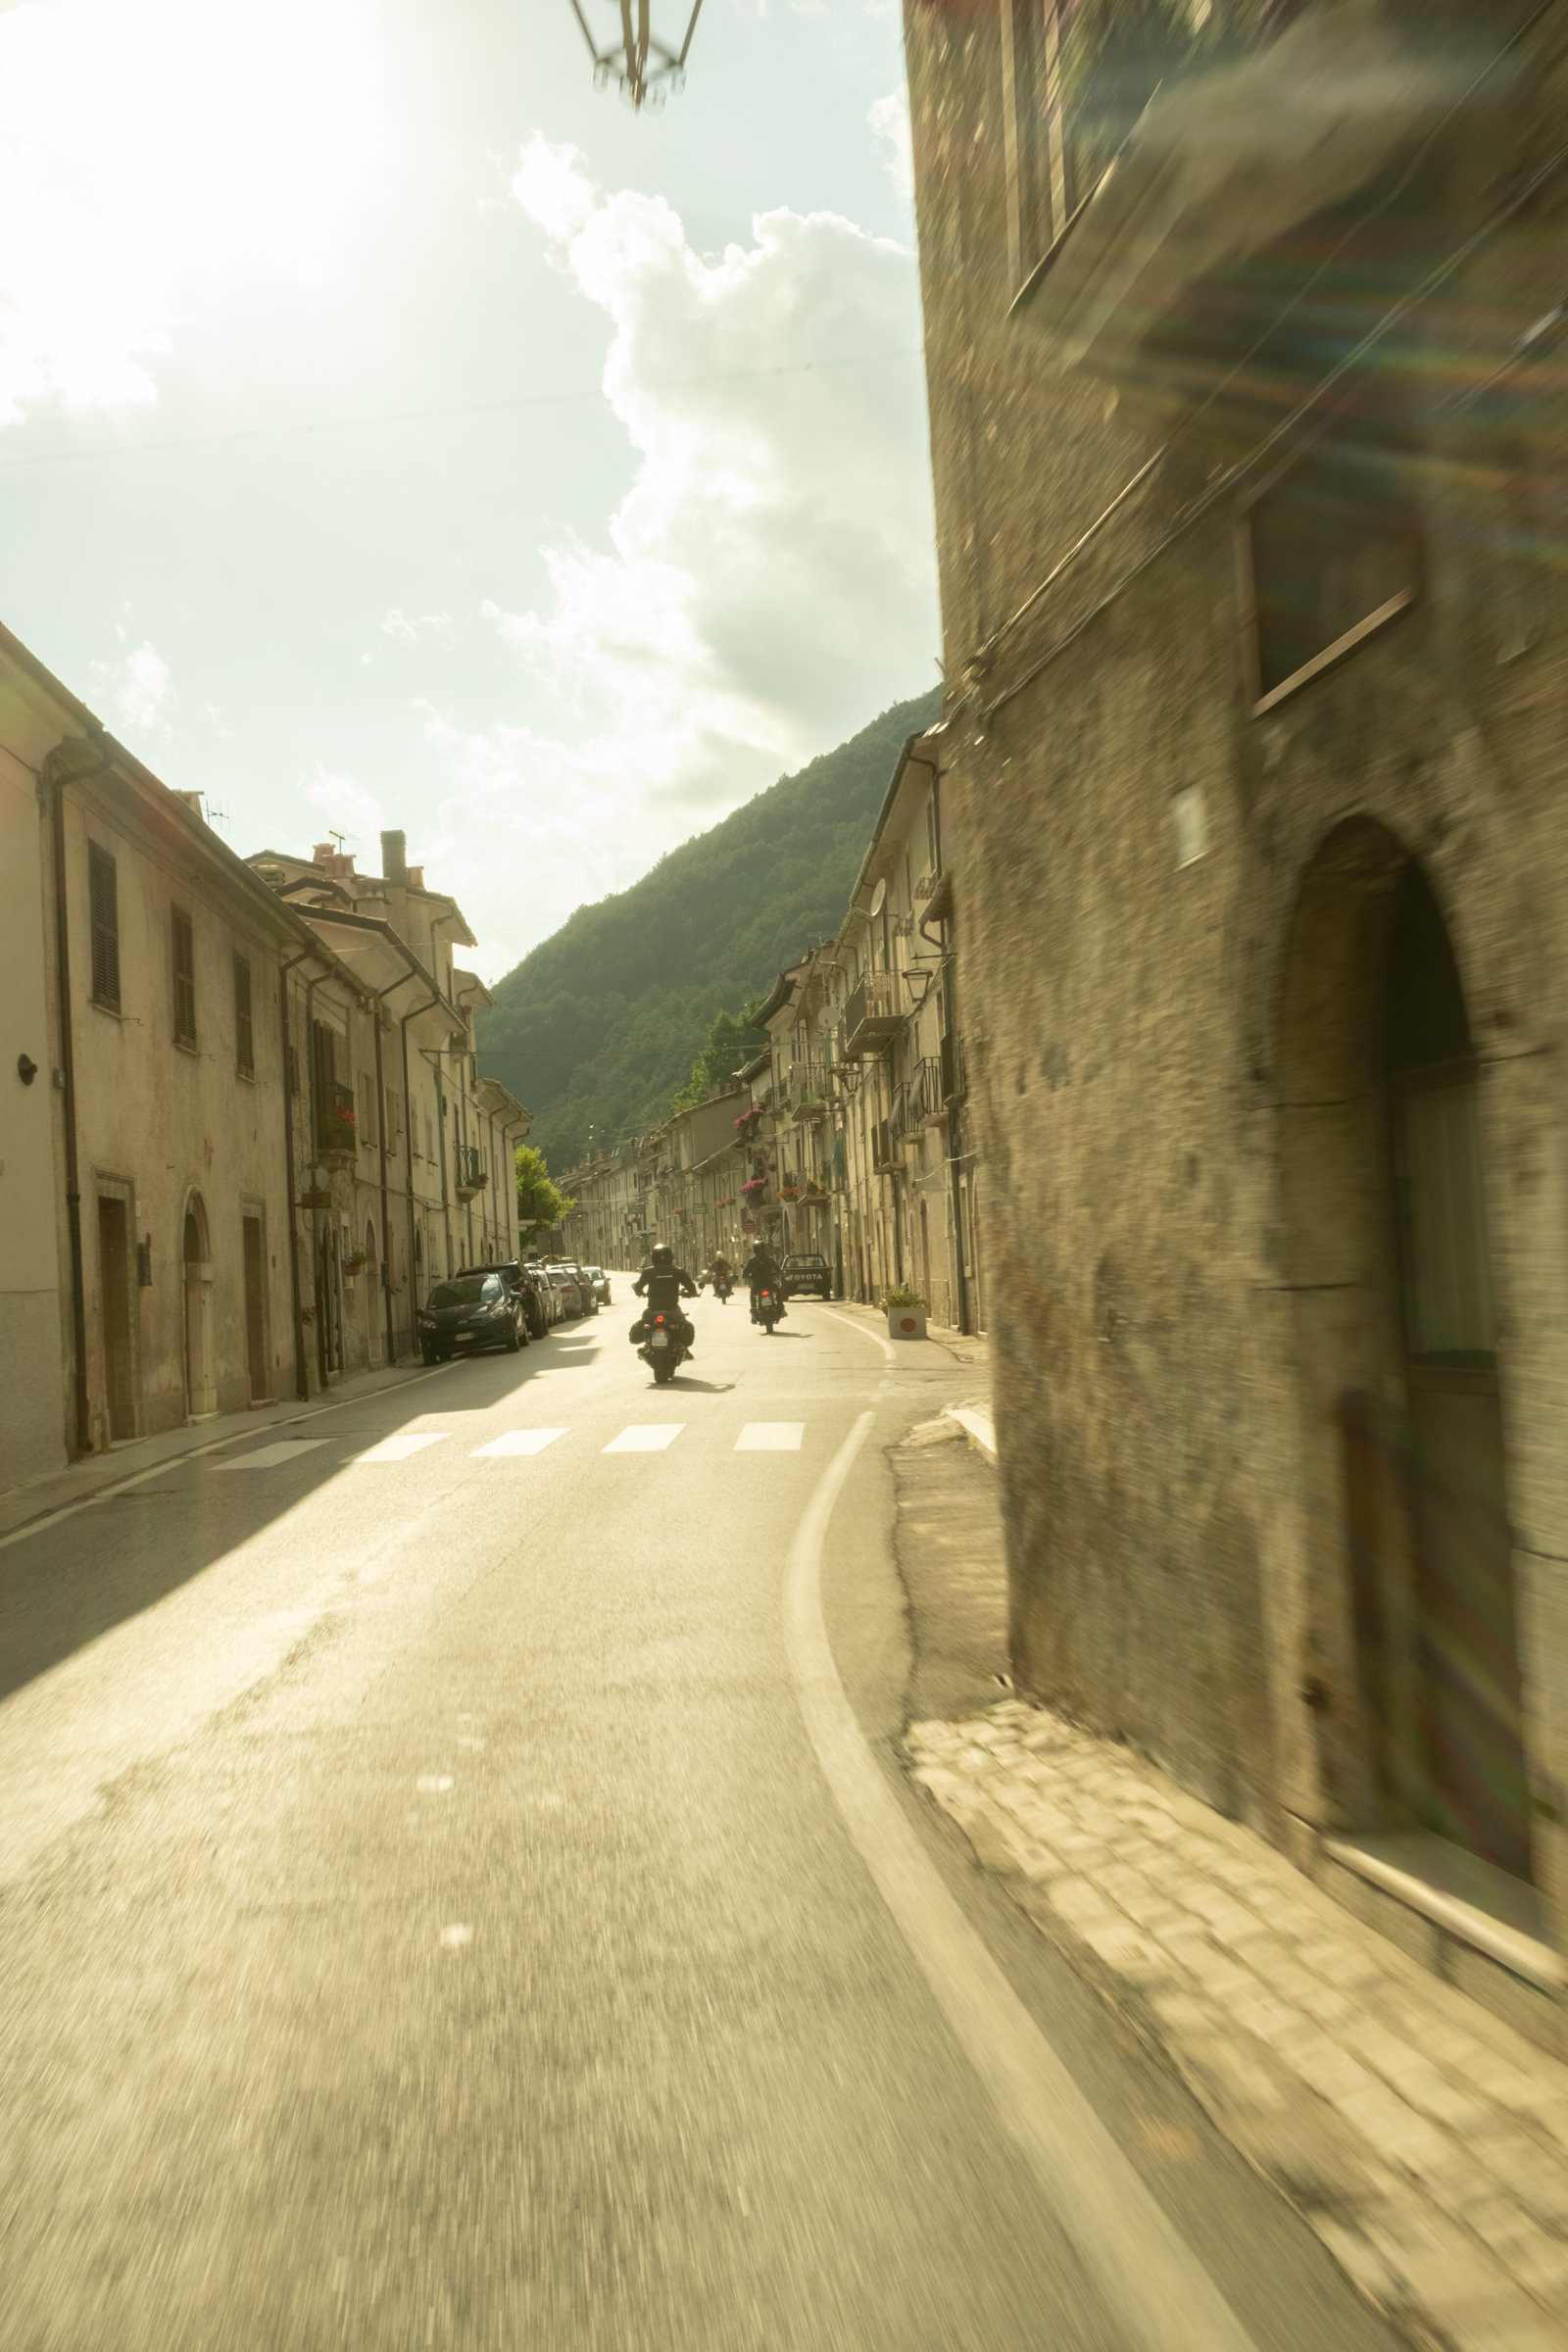 Motorcyclists ride through a mediveal town in Abruzzo, Italy